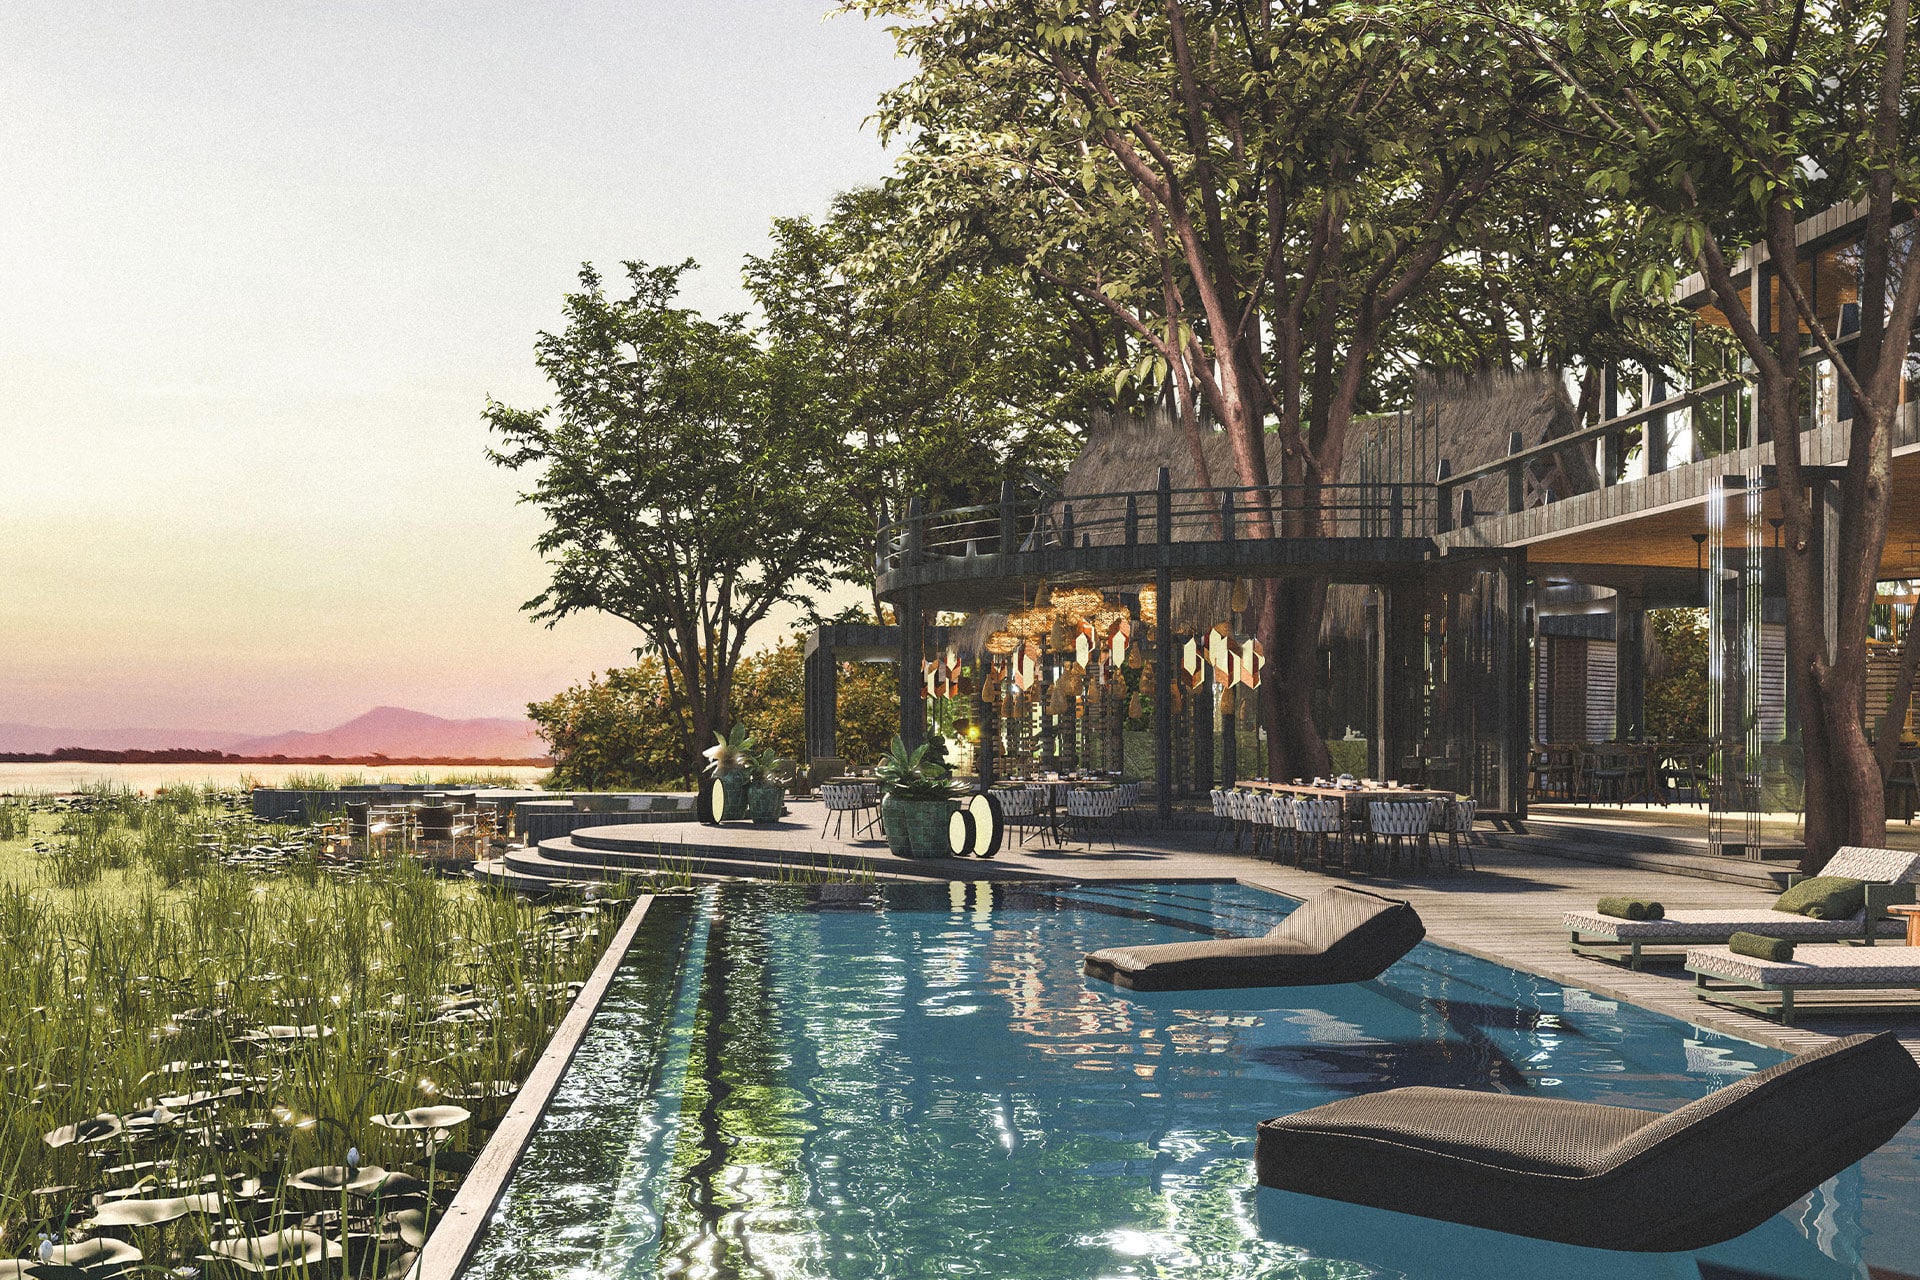 The main area and swimming pool at Lolebezi Safari Lodge – one of the new luxury lodges in Africa opening in 2022.